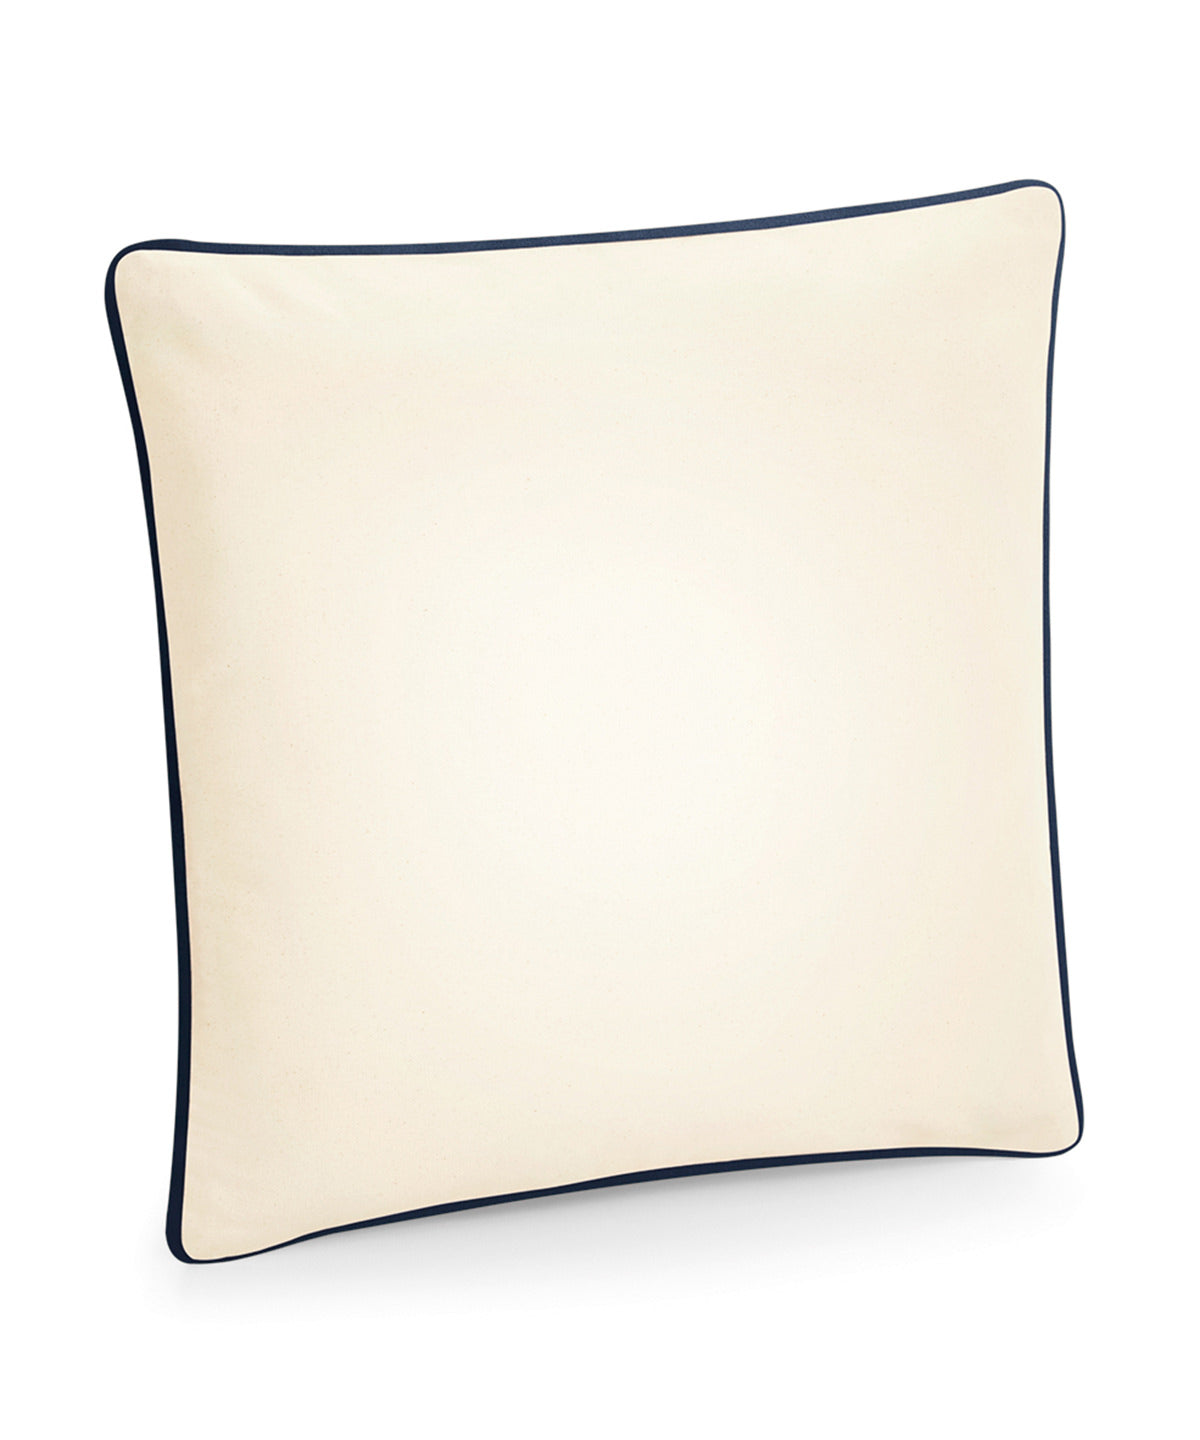 Outline Portrait Embroidered Cushion Cover